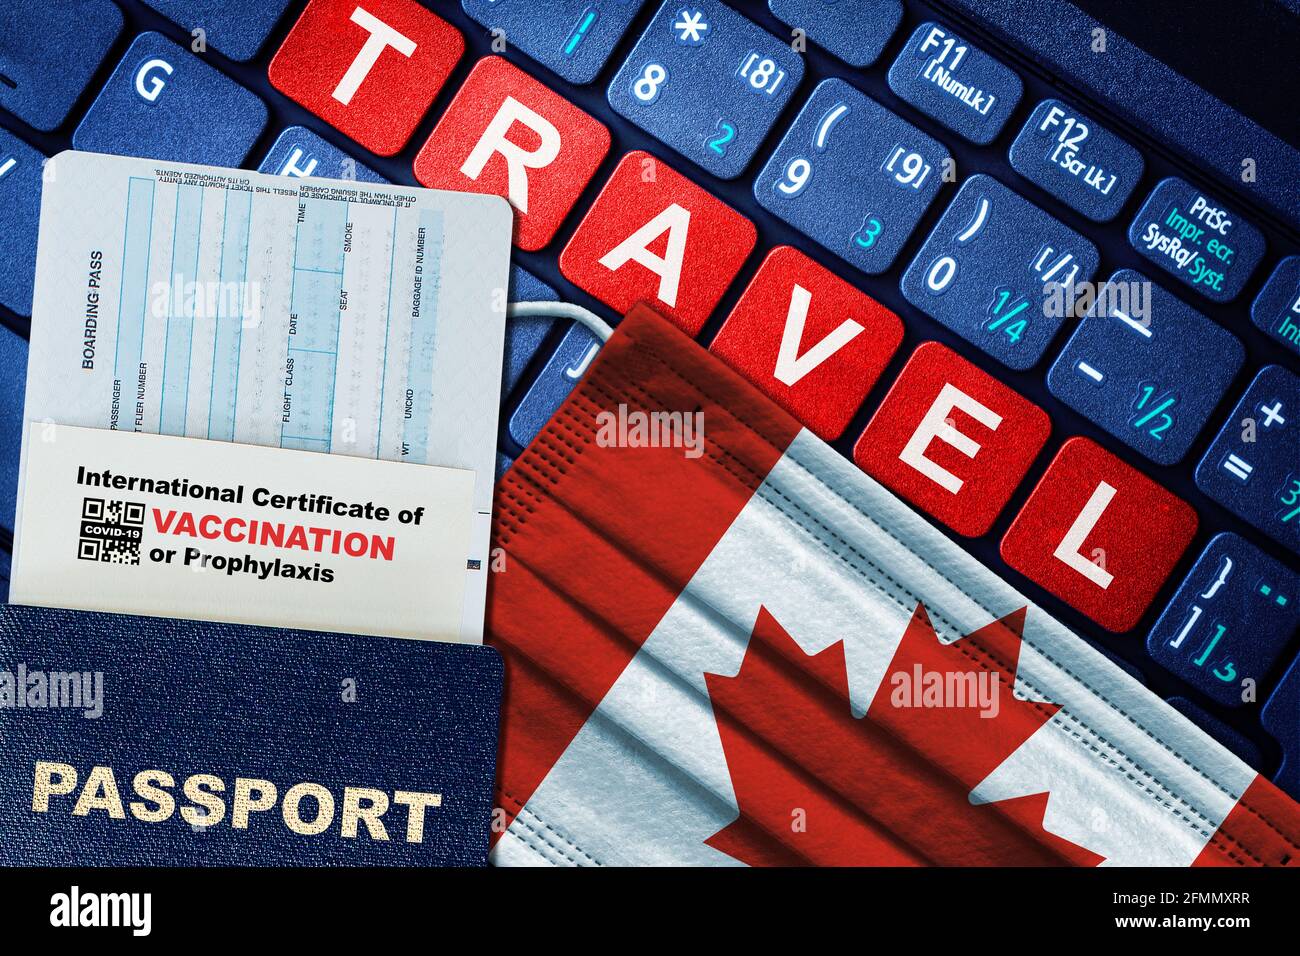 Canada new normal travel concept with passport, boarding pass, face mask with Canadian flag and certificate of COVID-19 vaccination on keyboard. Stock Photo